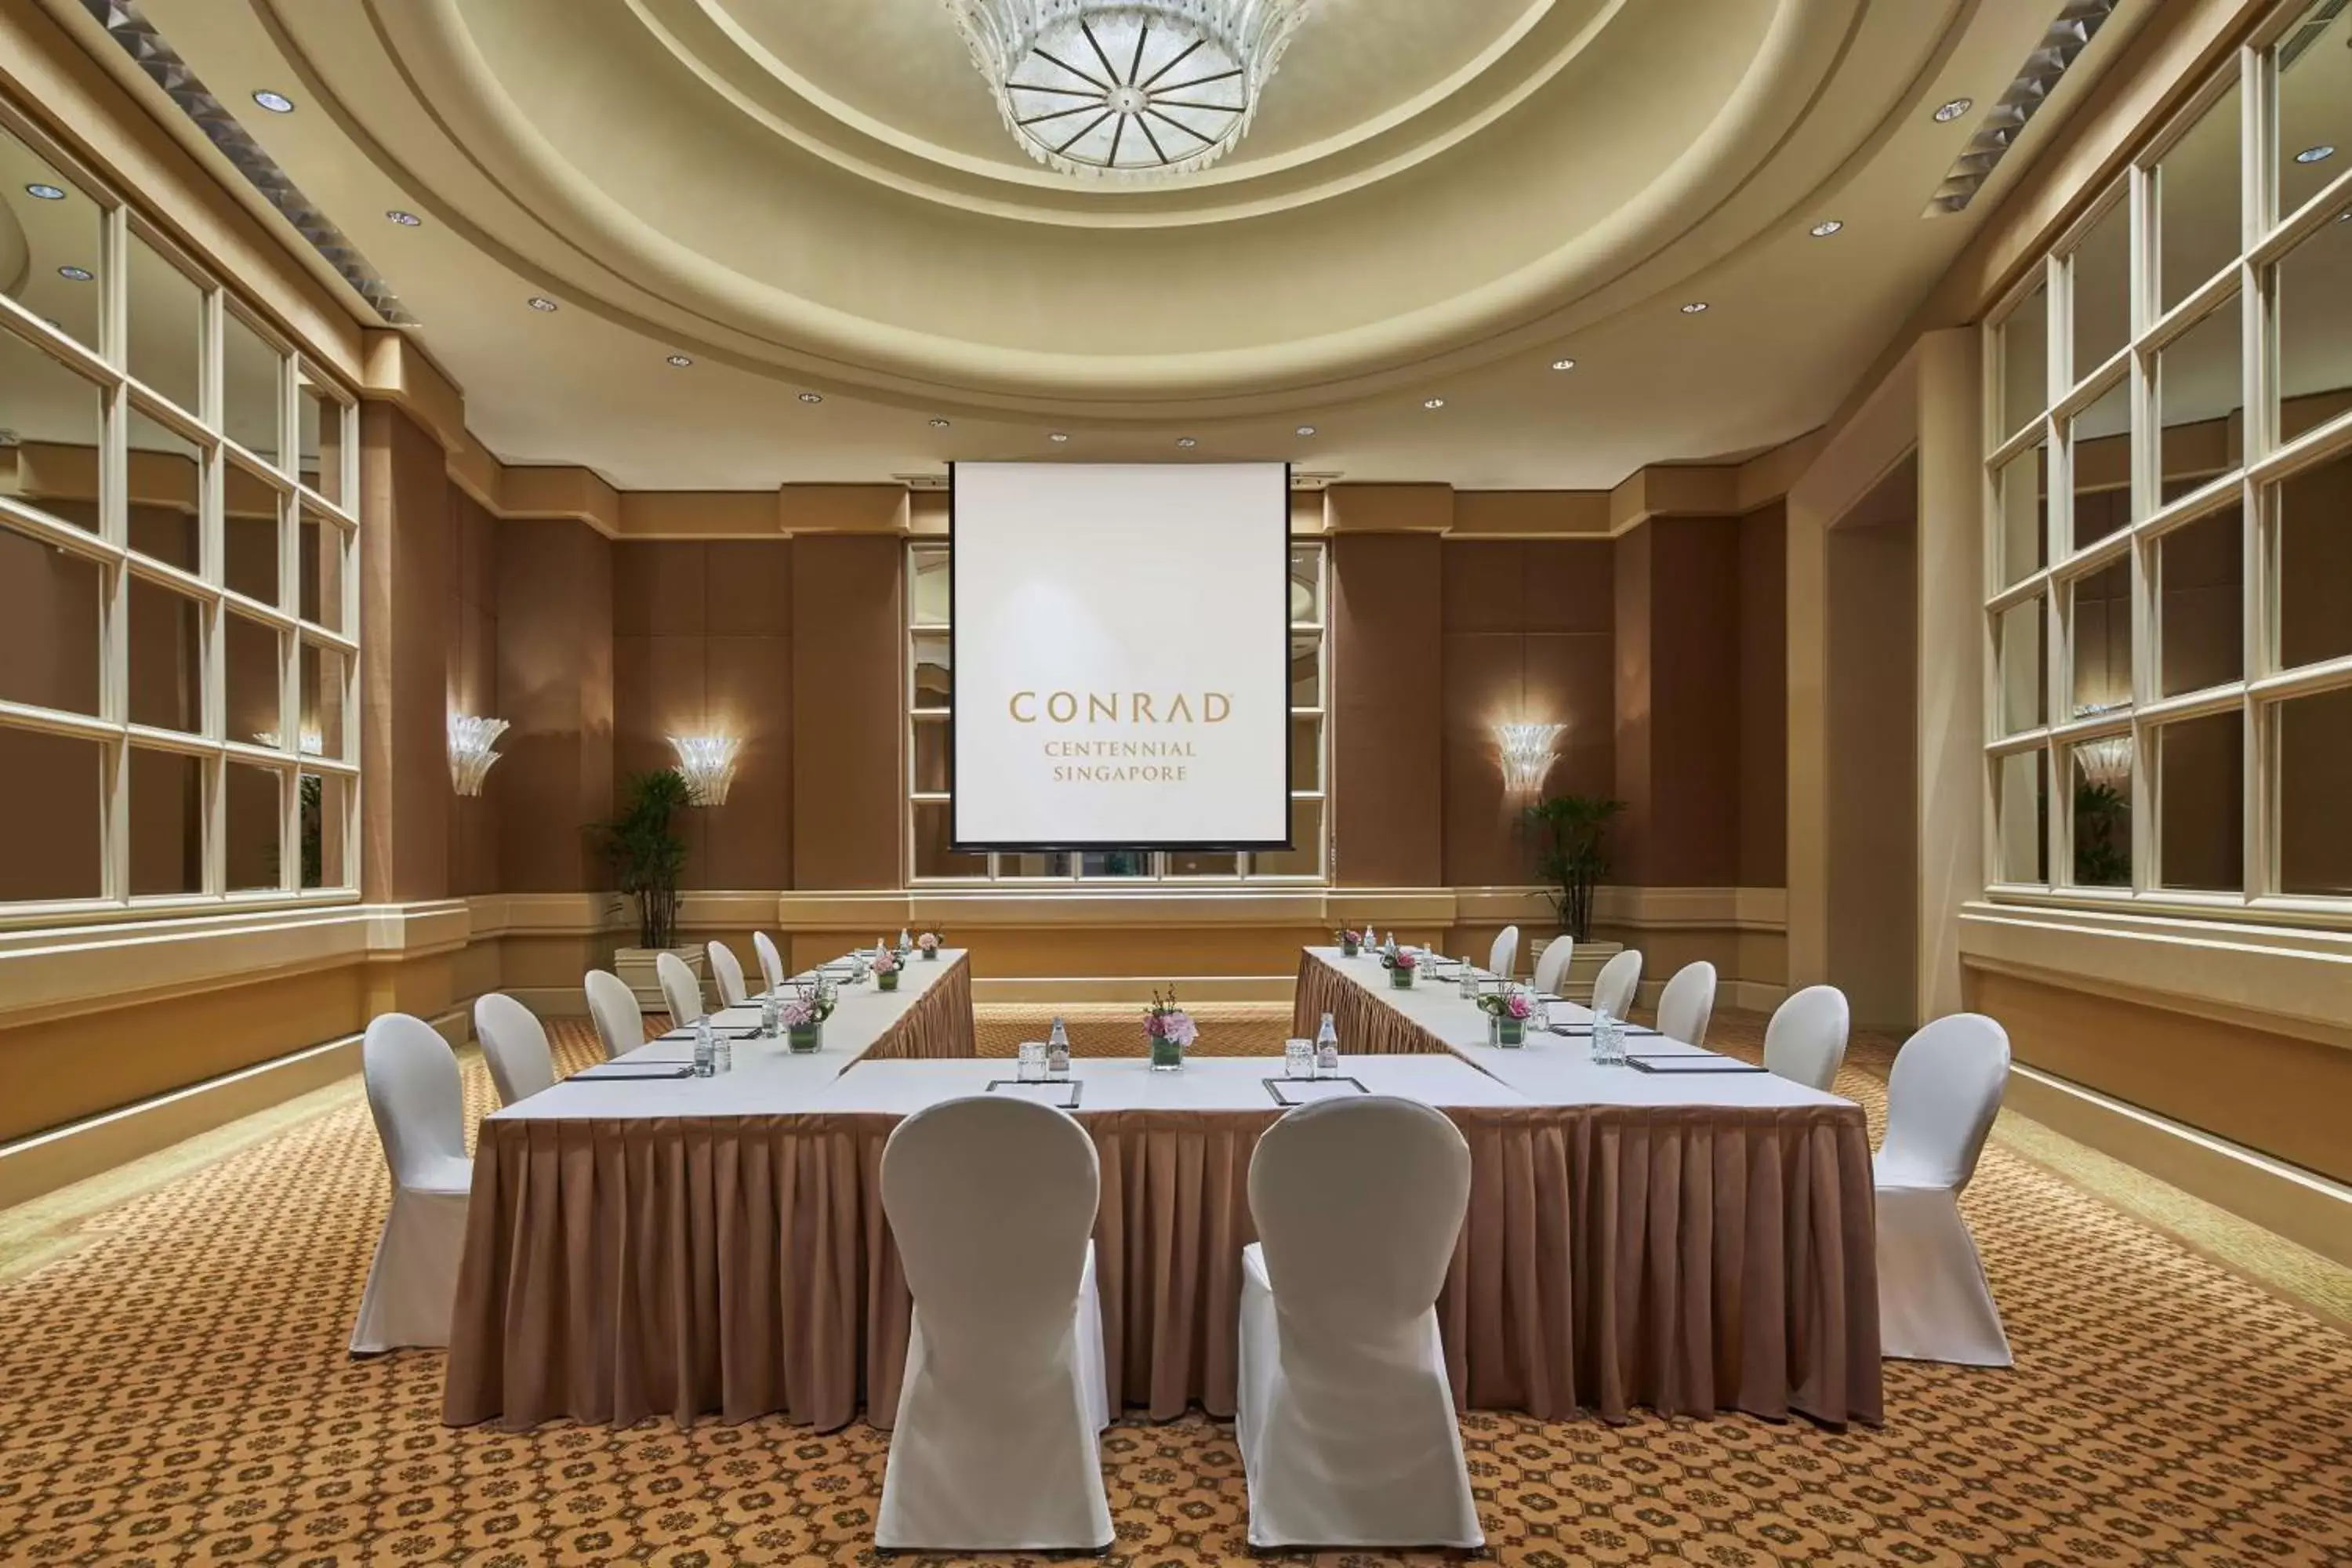 Meeting/conference room, Business Area/Conference Room in Conrad Centennial Singapore